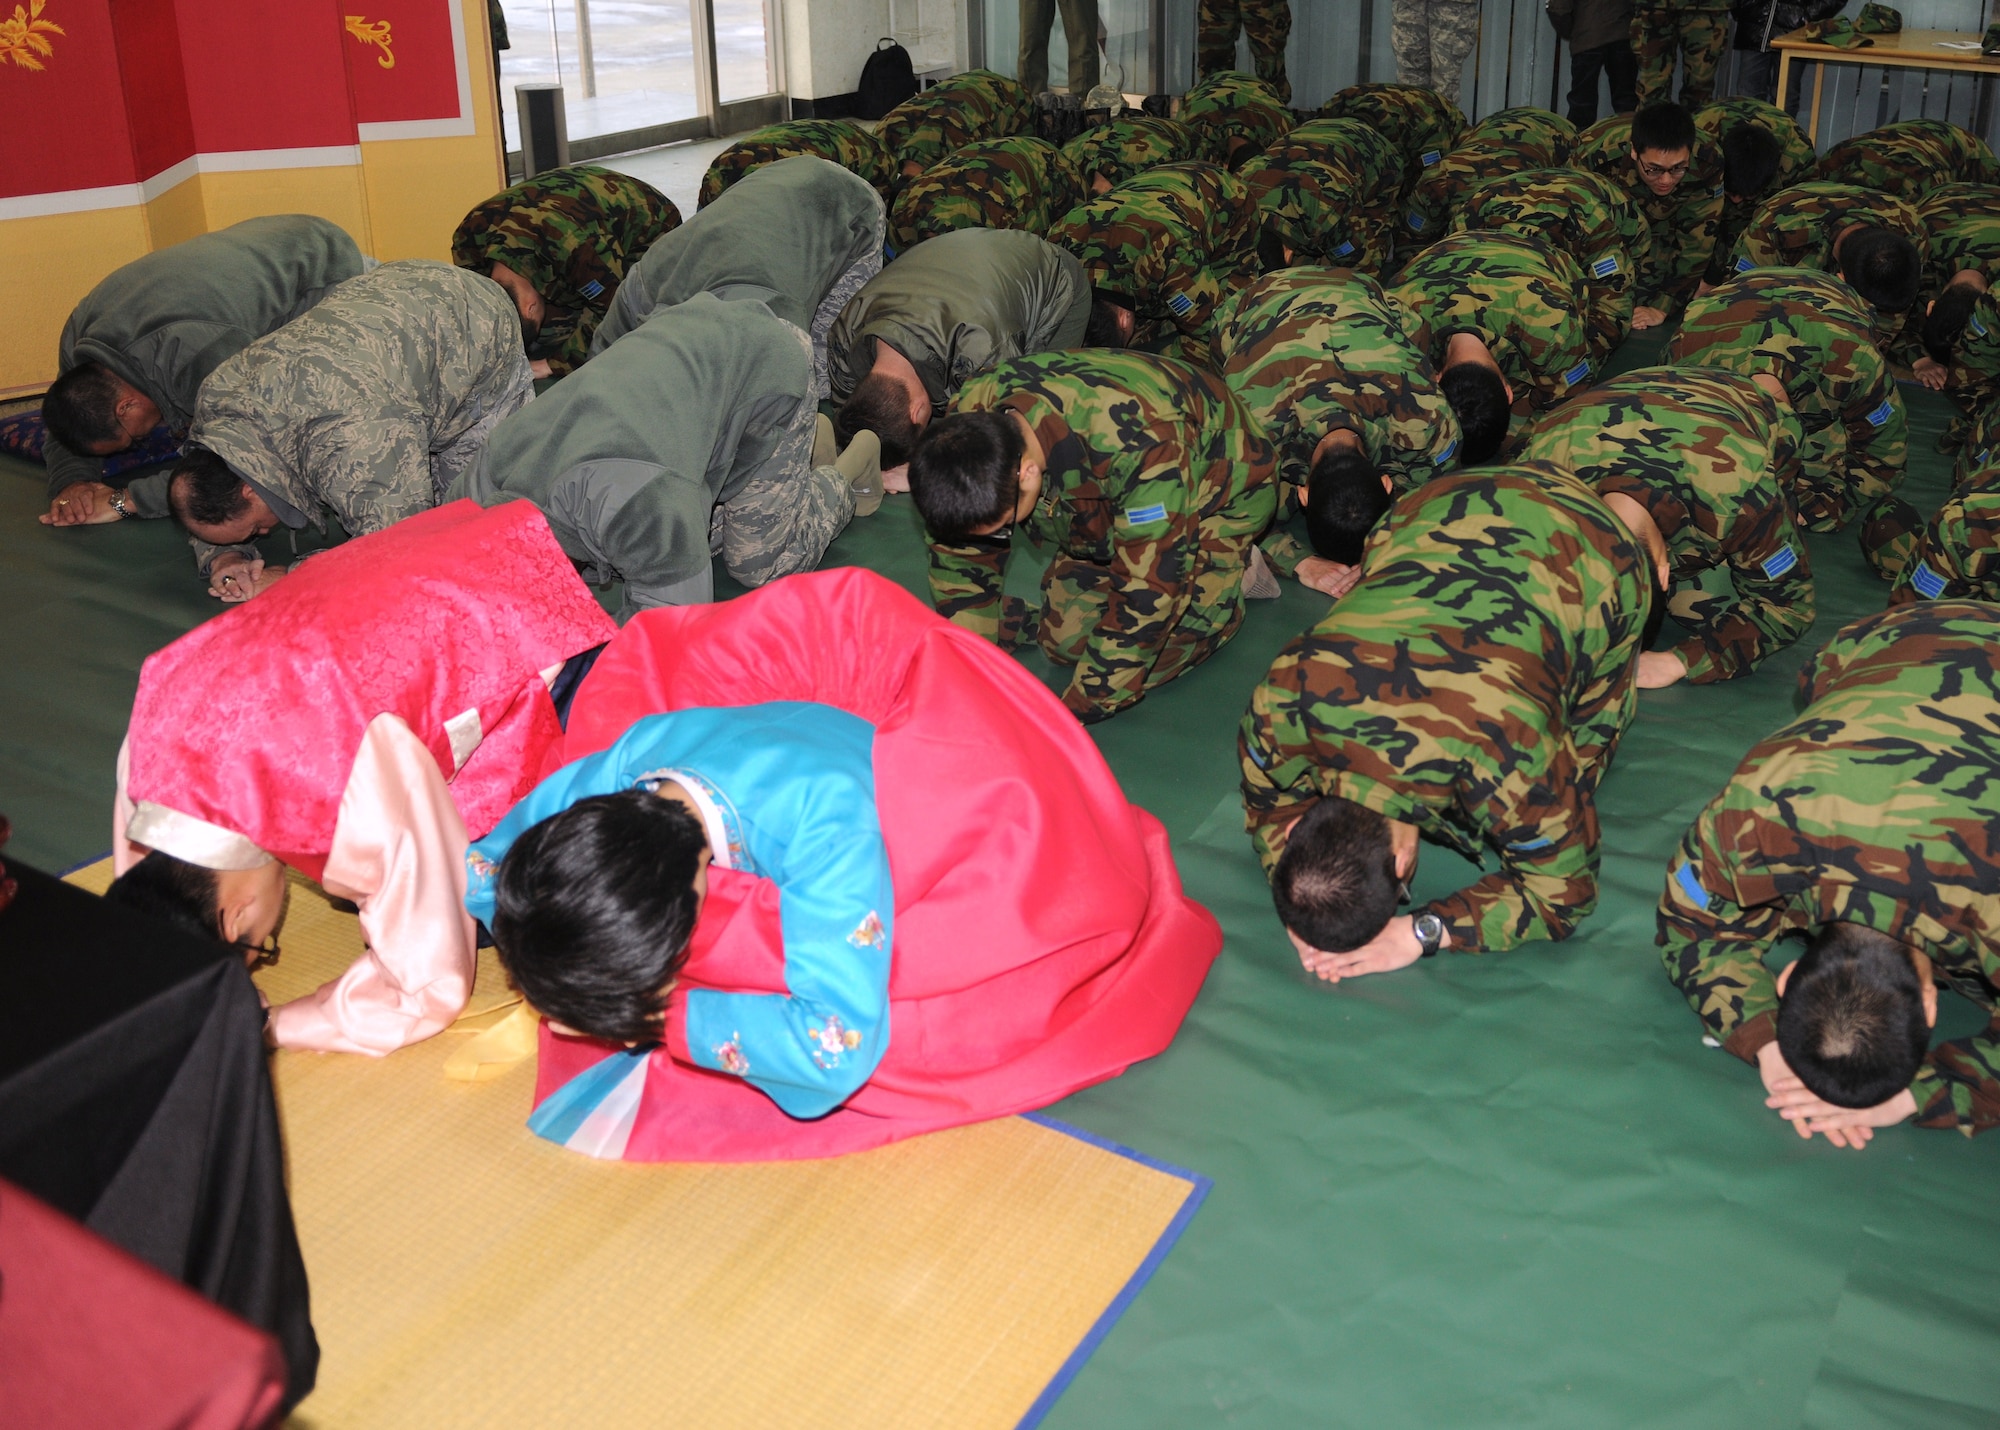 KUNSAN AIR BASE, Republic of Korea -- Members of the 8th Fighter Wing and Republic of Korea Air Force 38th Fighter Group begin a memorial service by bowing during a Lunar New Year ceremony in the ROKAF base exchange Feb. 3. The combined 8th FW and ROKAF 38th FG ceremony included a memorial service, ceremonial bowing, a traditional Korean breakfast and traditional games. (U.S. Air Force photo/Senior Airman Ciara Wymbs)